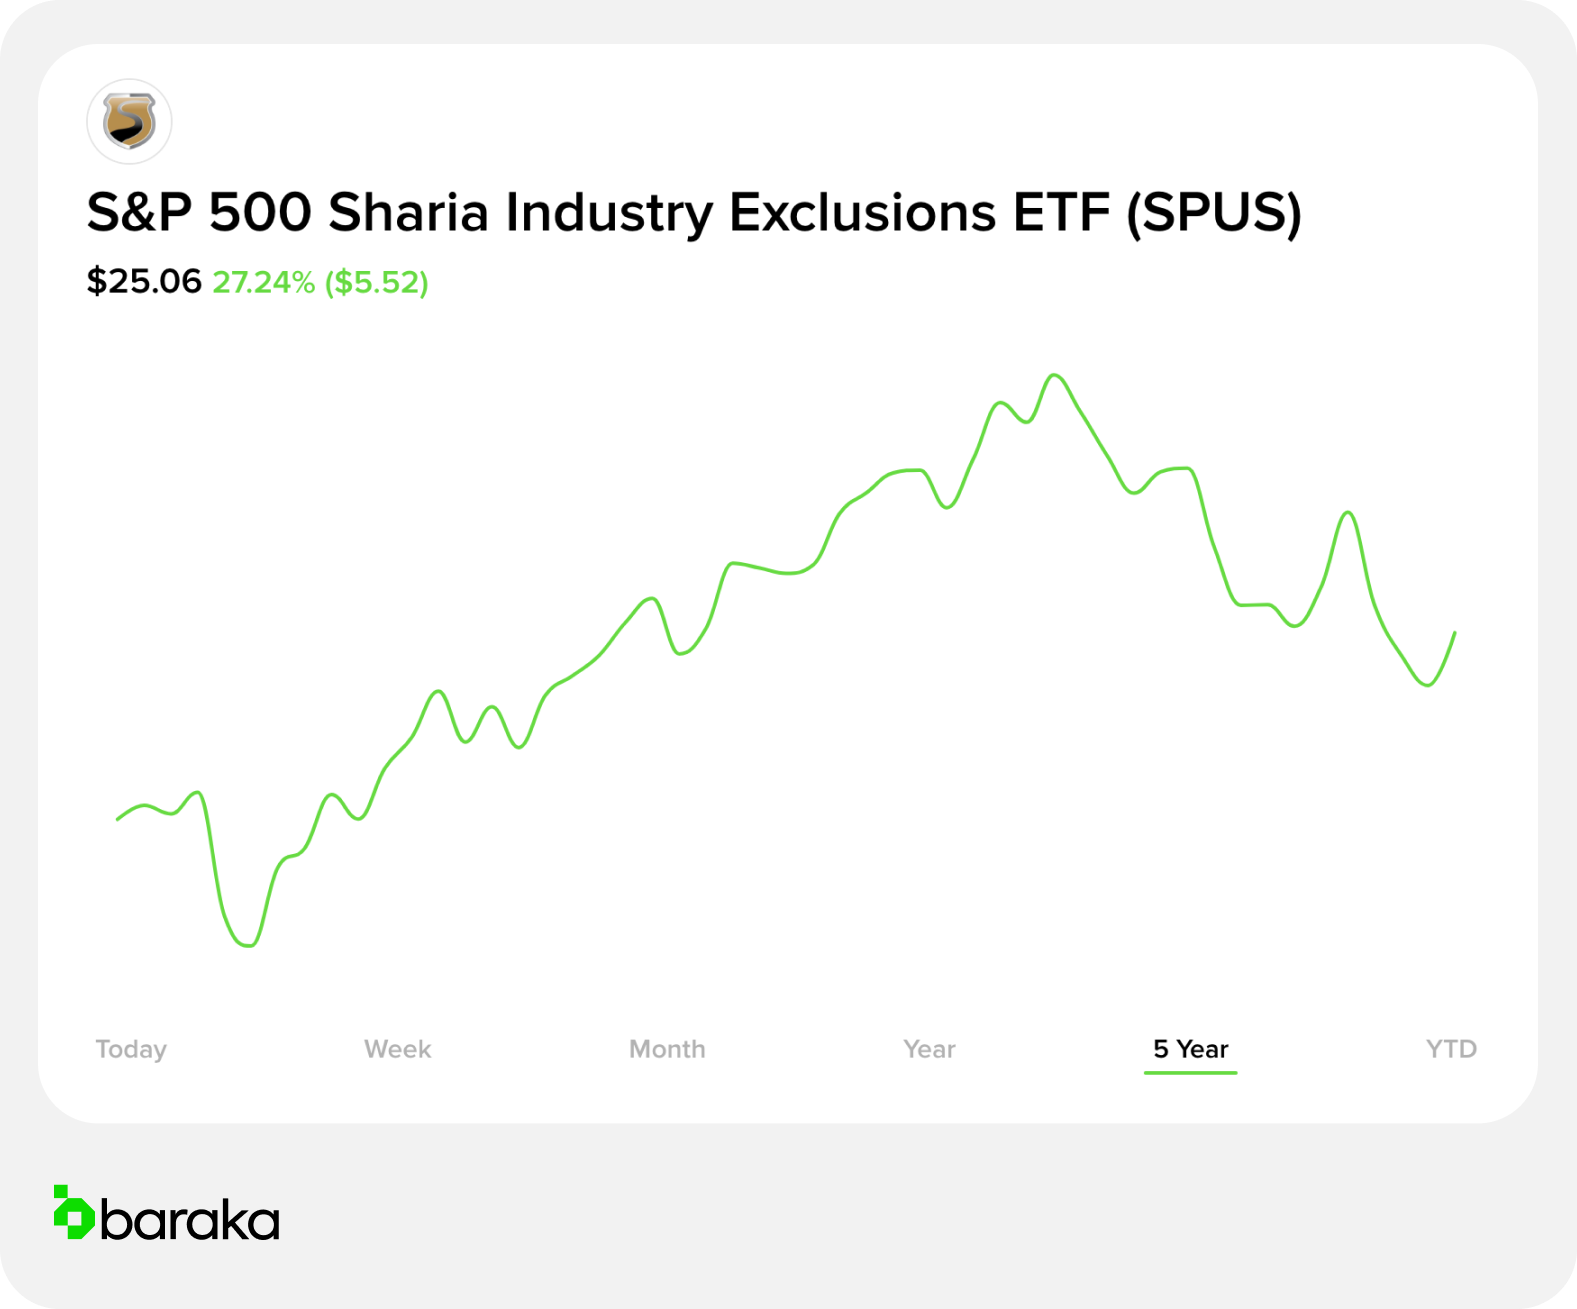 halal-islamic-etfSP Funds S&P 500 Sharia Industry Exclusions ETF